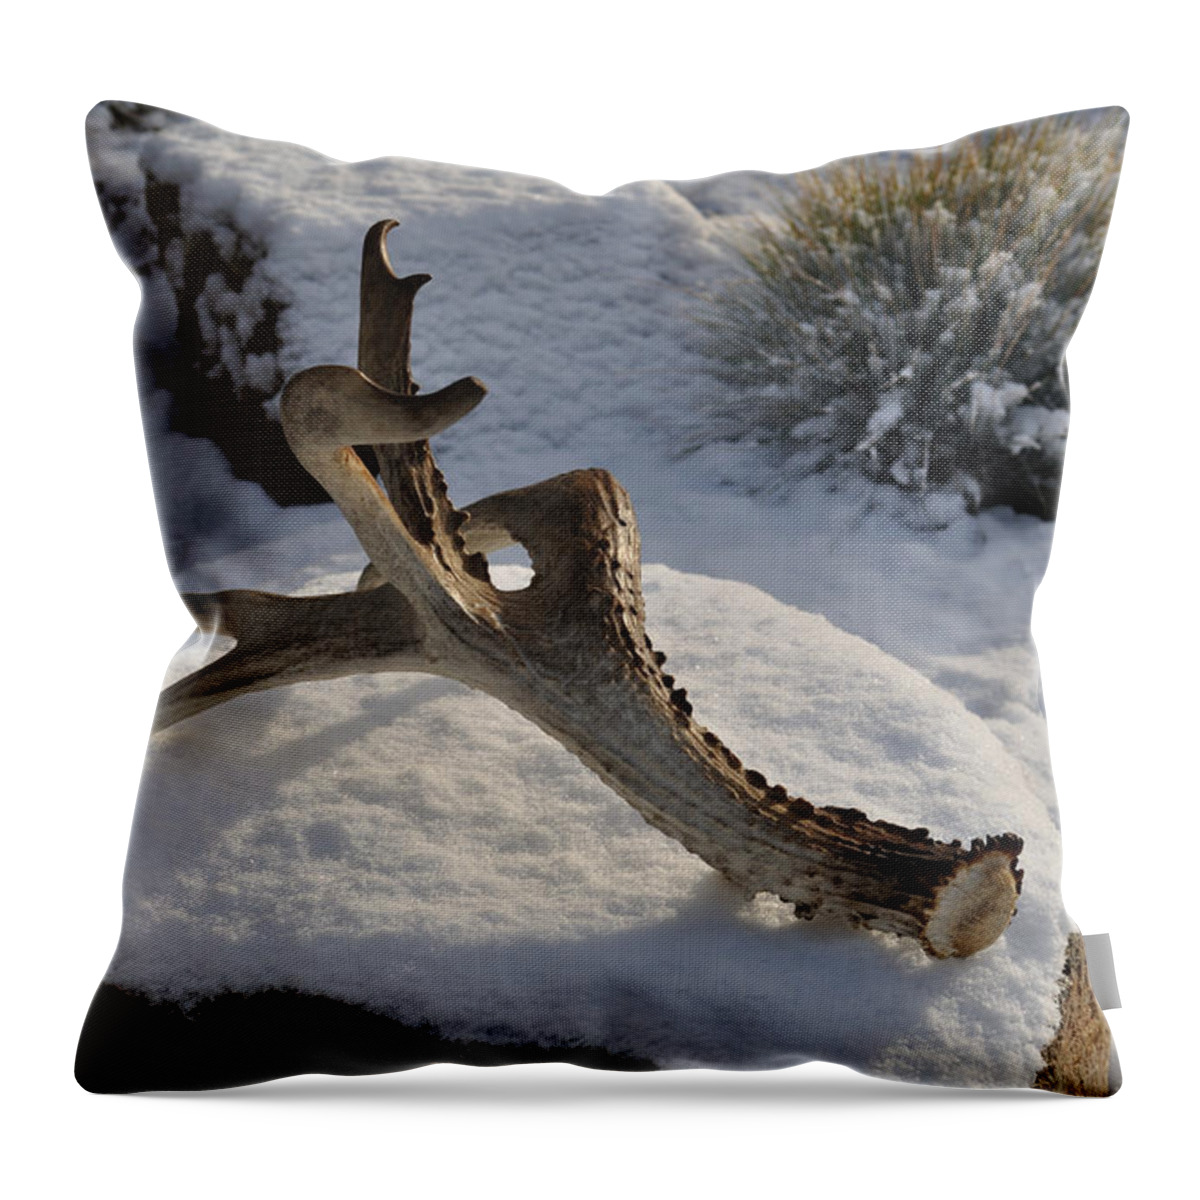 Mule Throw Pillow featuring the photograph Antler by Heather L Wright